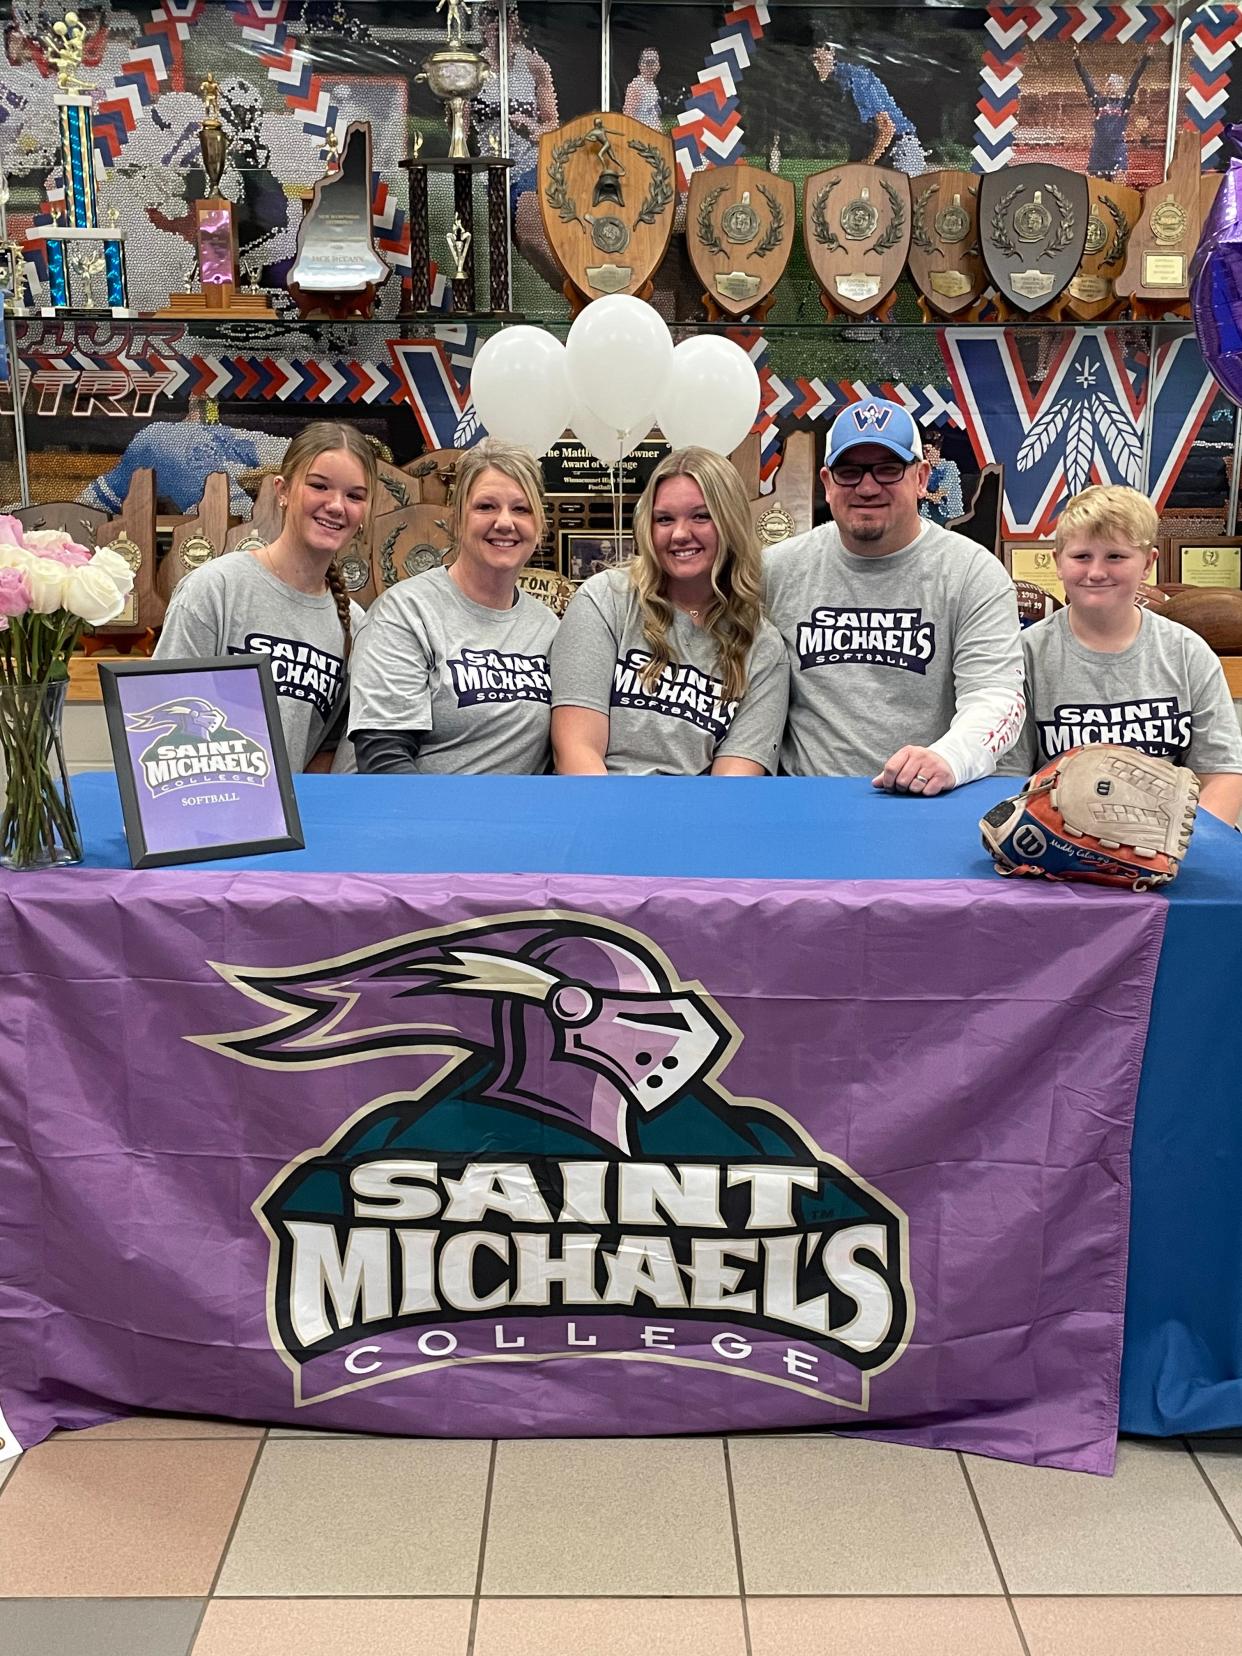 Winnacunnet's Maddie Eaton, center, recently announced her commitment to play softball at Division II Saint Michael's College. Eaton was joined at her signing by her parents Matt and Melanie; her sister, Marley; and her brother, Jackson.